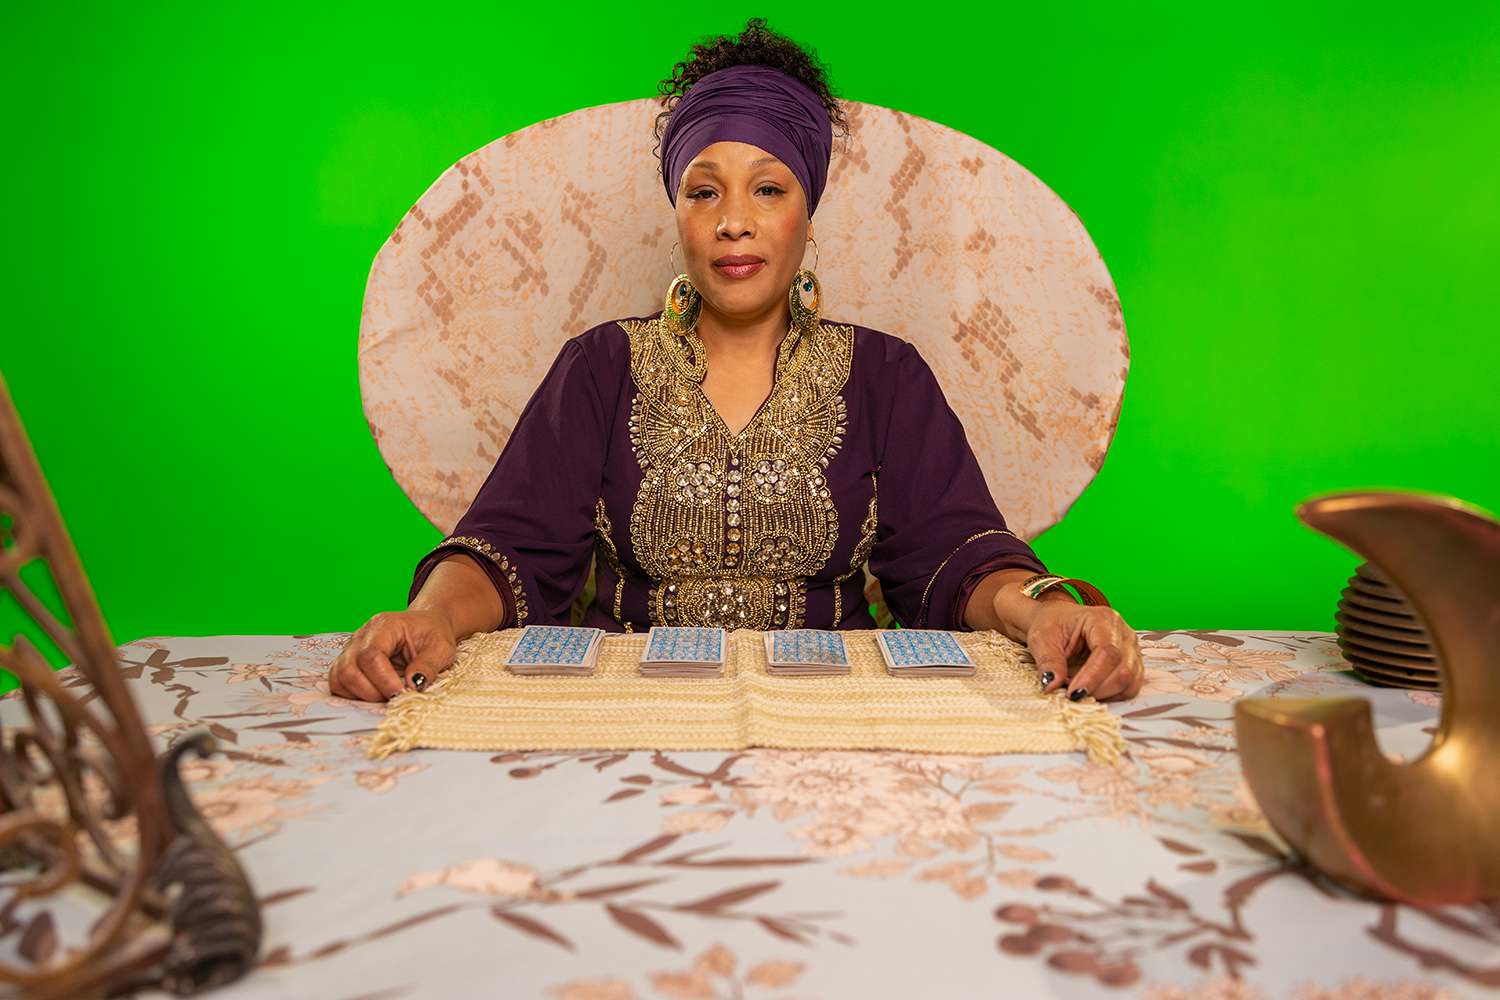 Psychic Sensation Miss Cleo's 'Side of the Story' Is 'Finally' Told in New Biopic 'Miss Cleo: The Rise and Fall' (Exclusive)